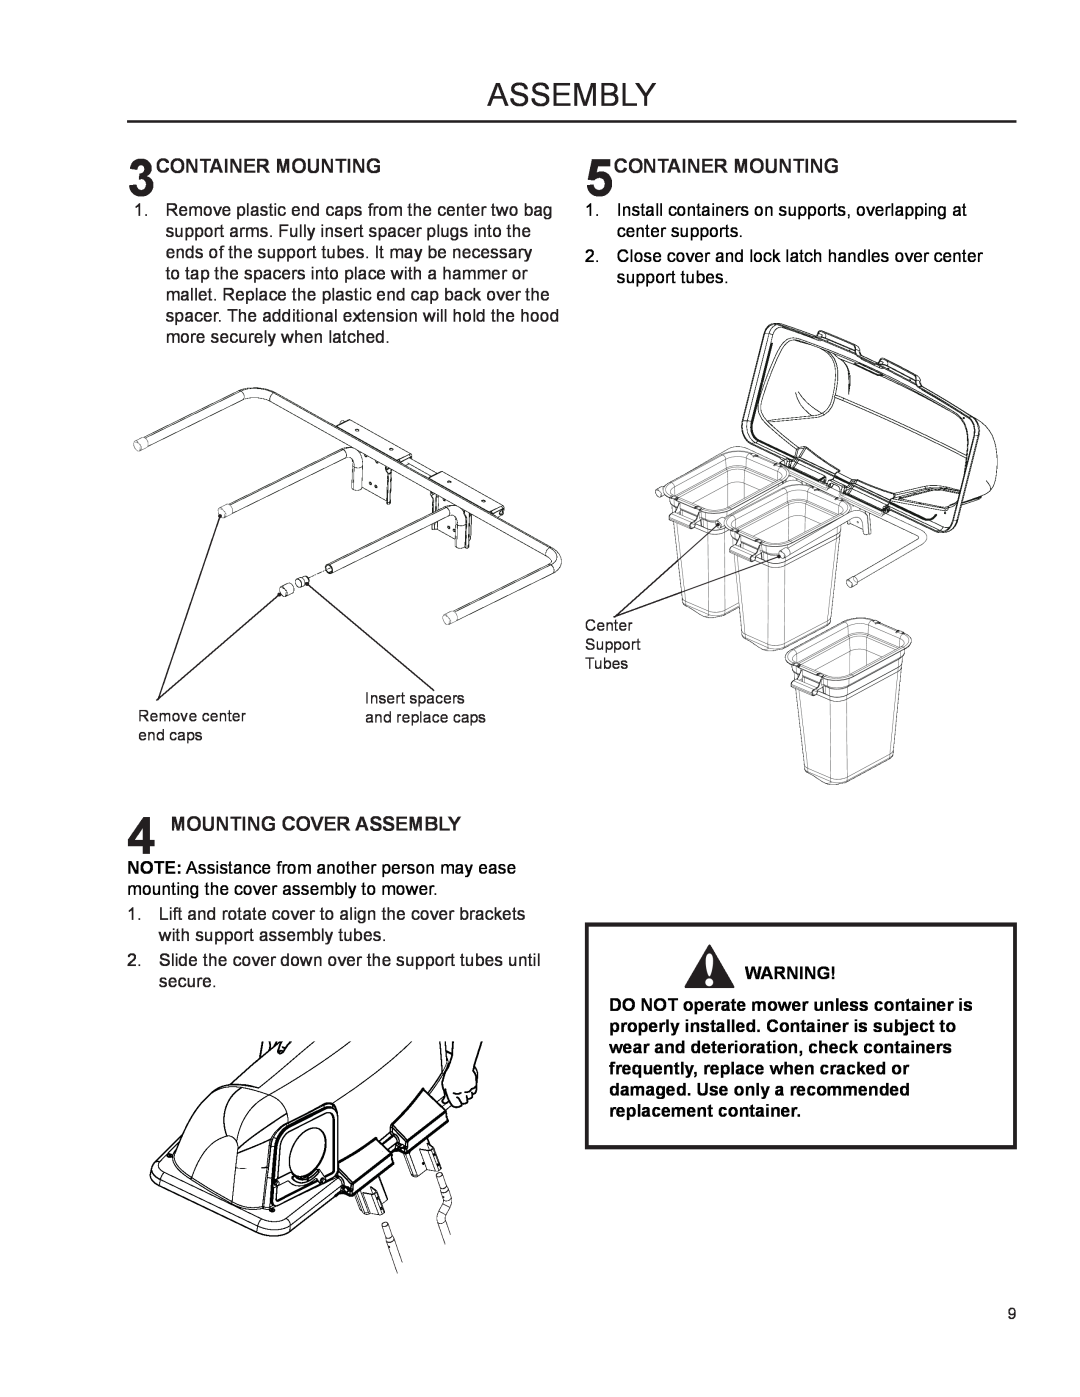 Dixon 966 004201 manual 3CONTAINER MOUNTING, 5CONTAINER MOUNTING, Mounting Cover Assembly 